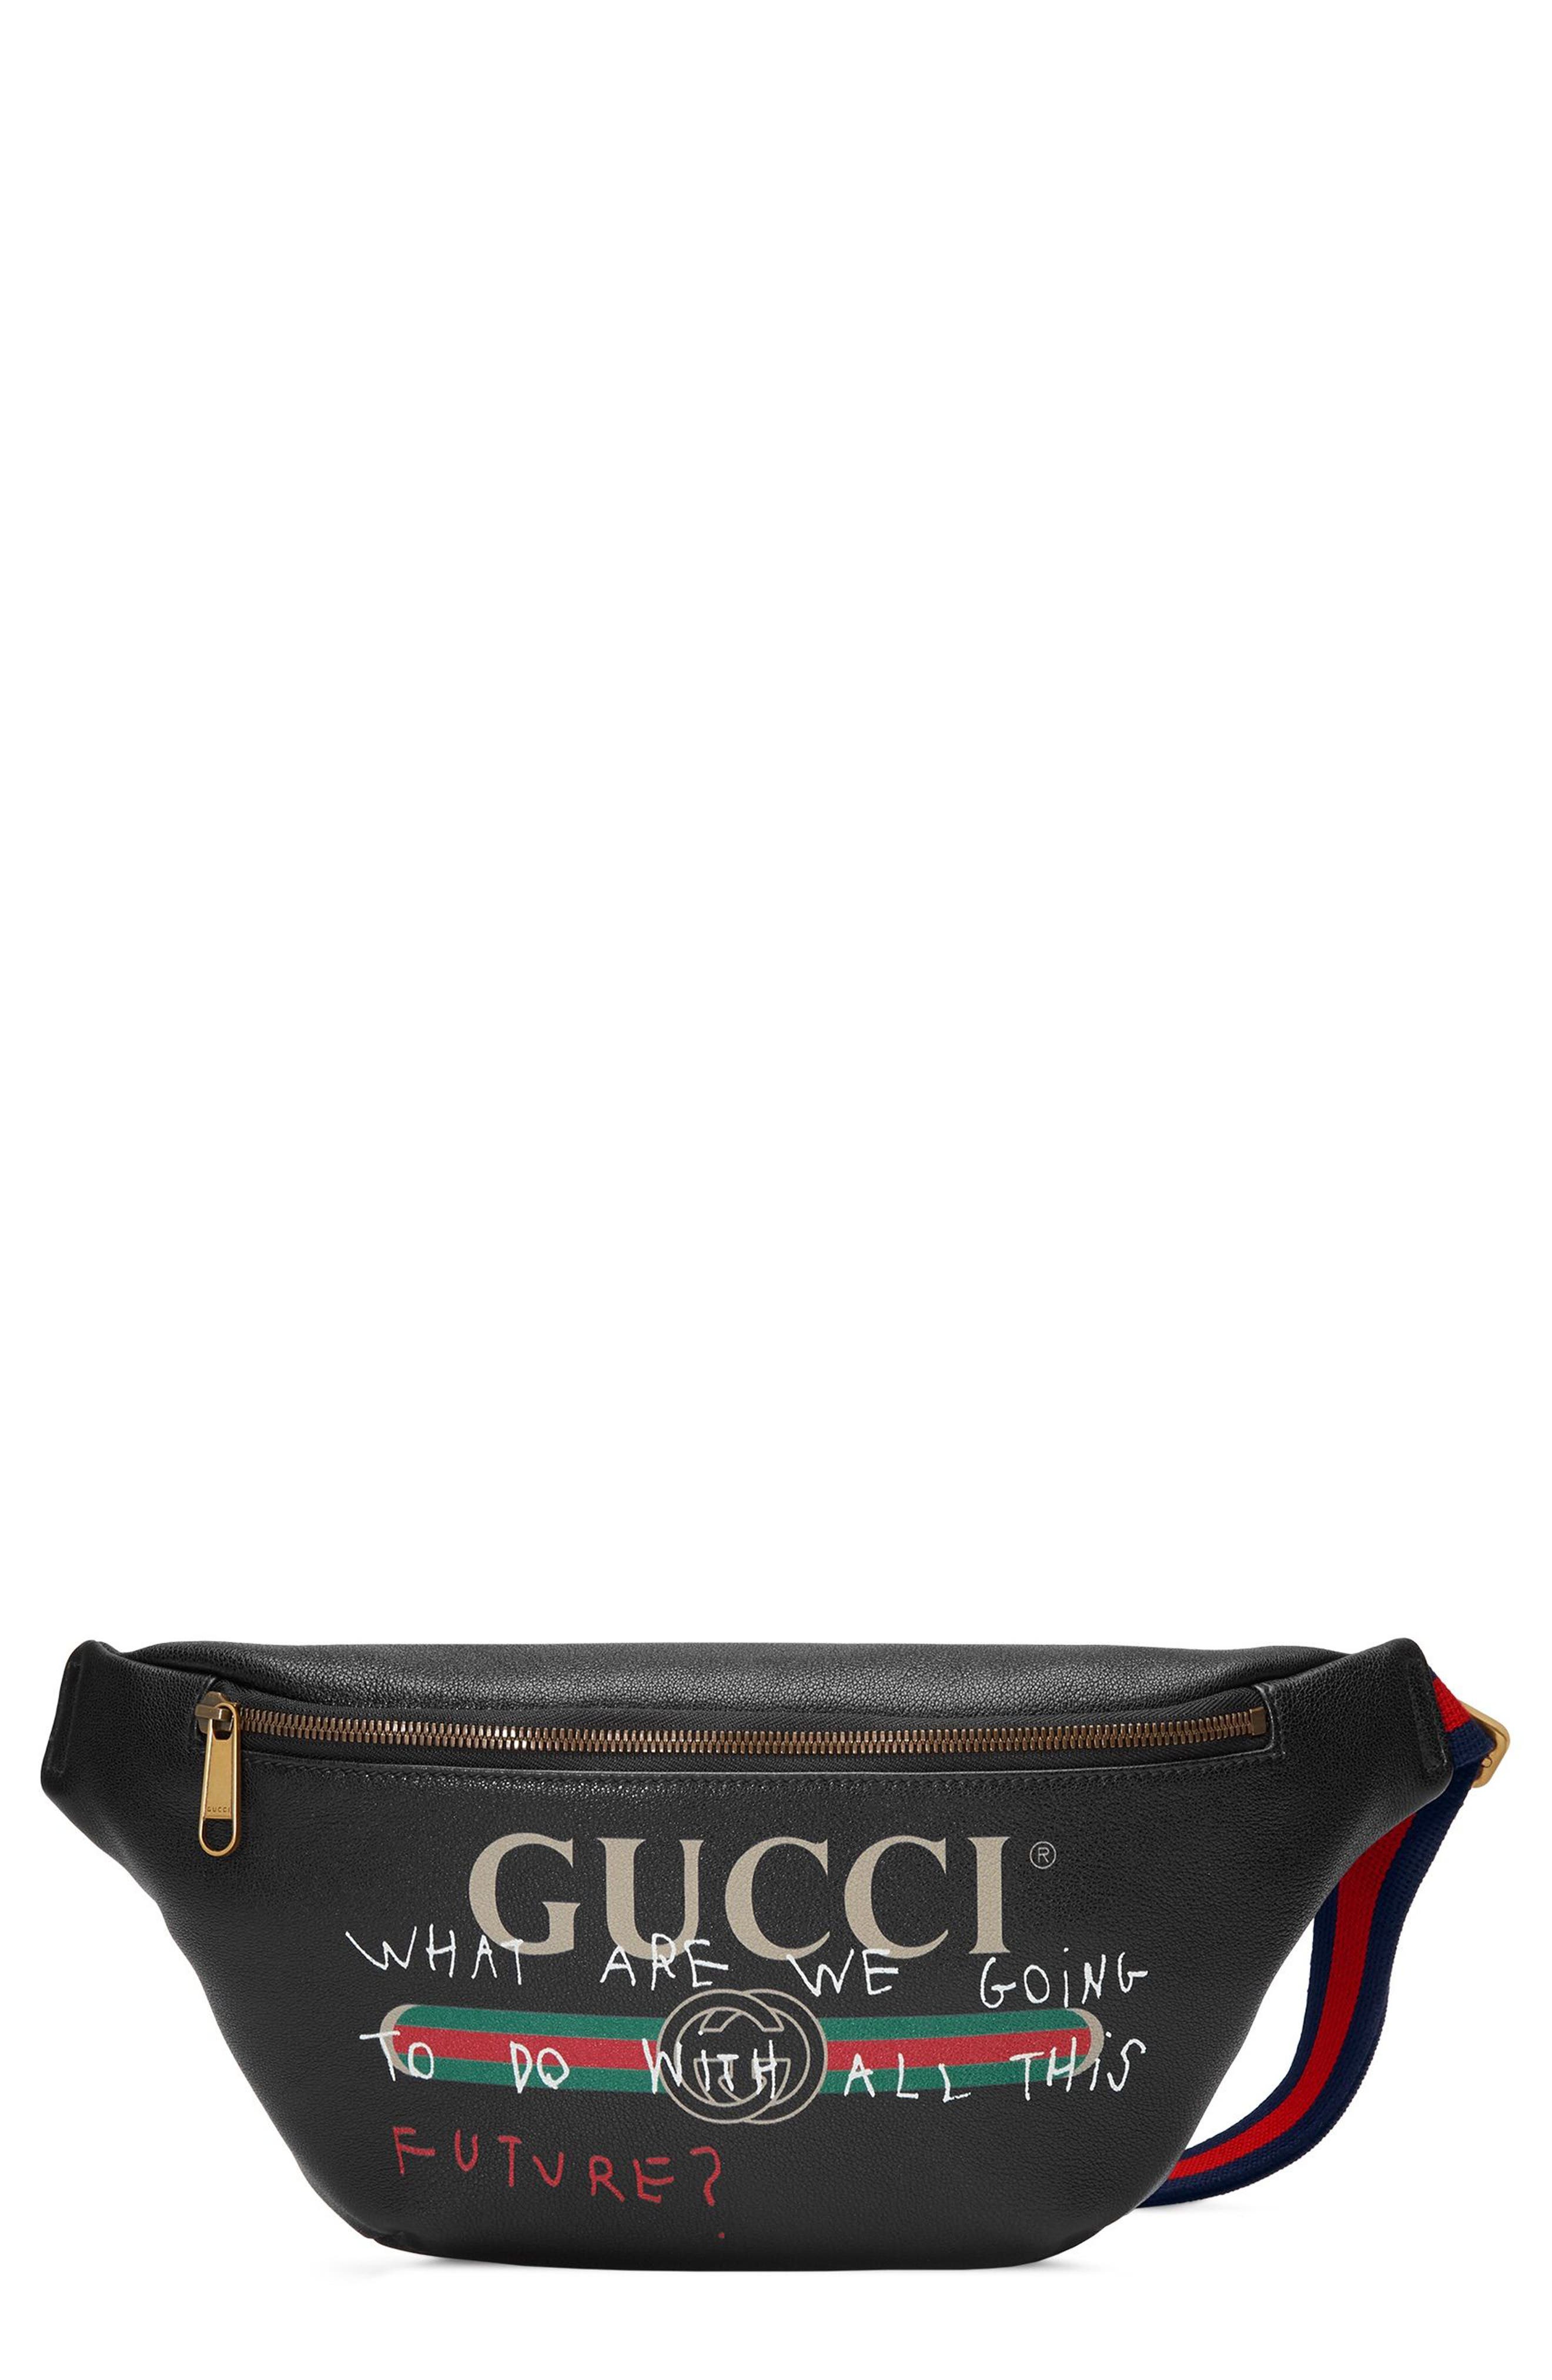 gucci bag with writing